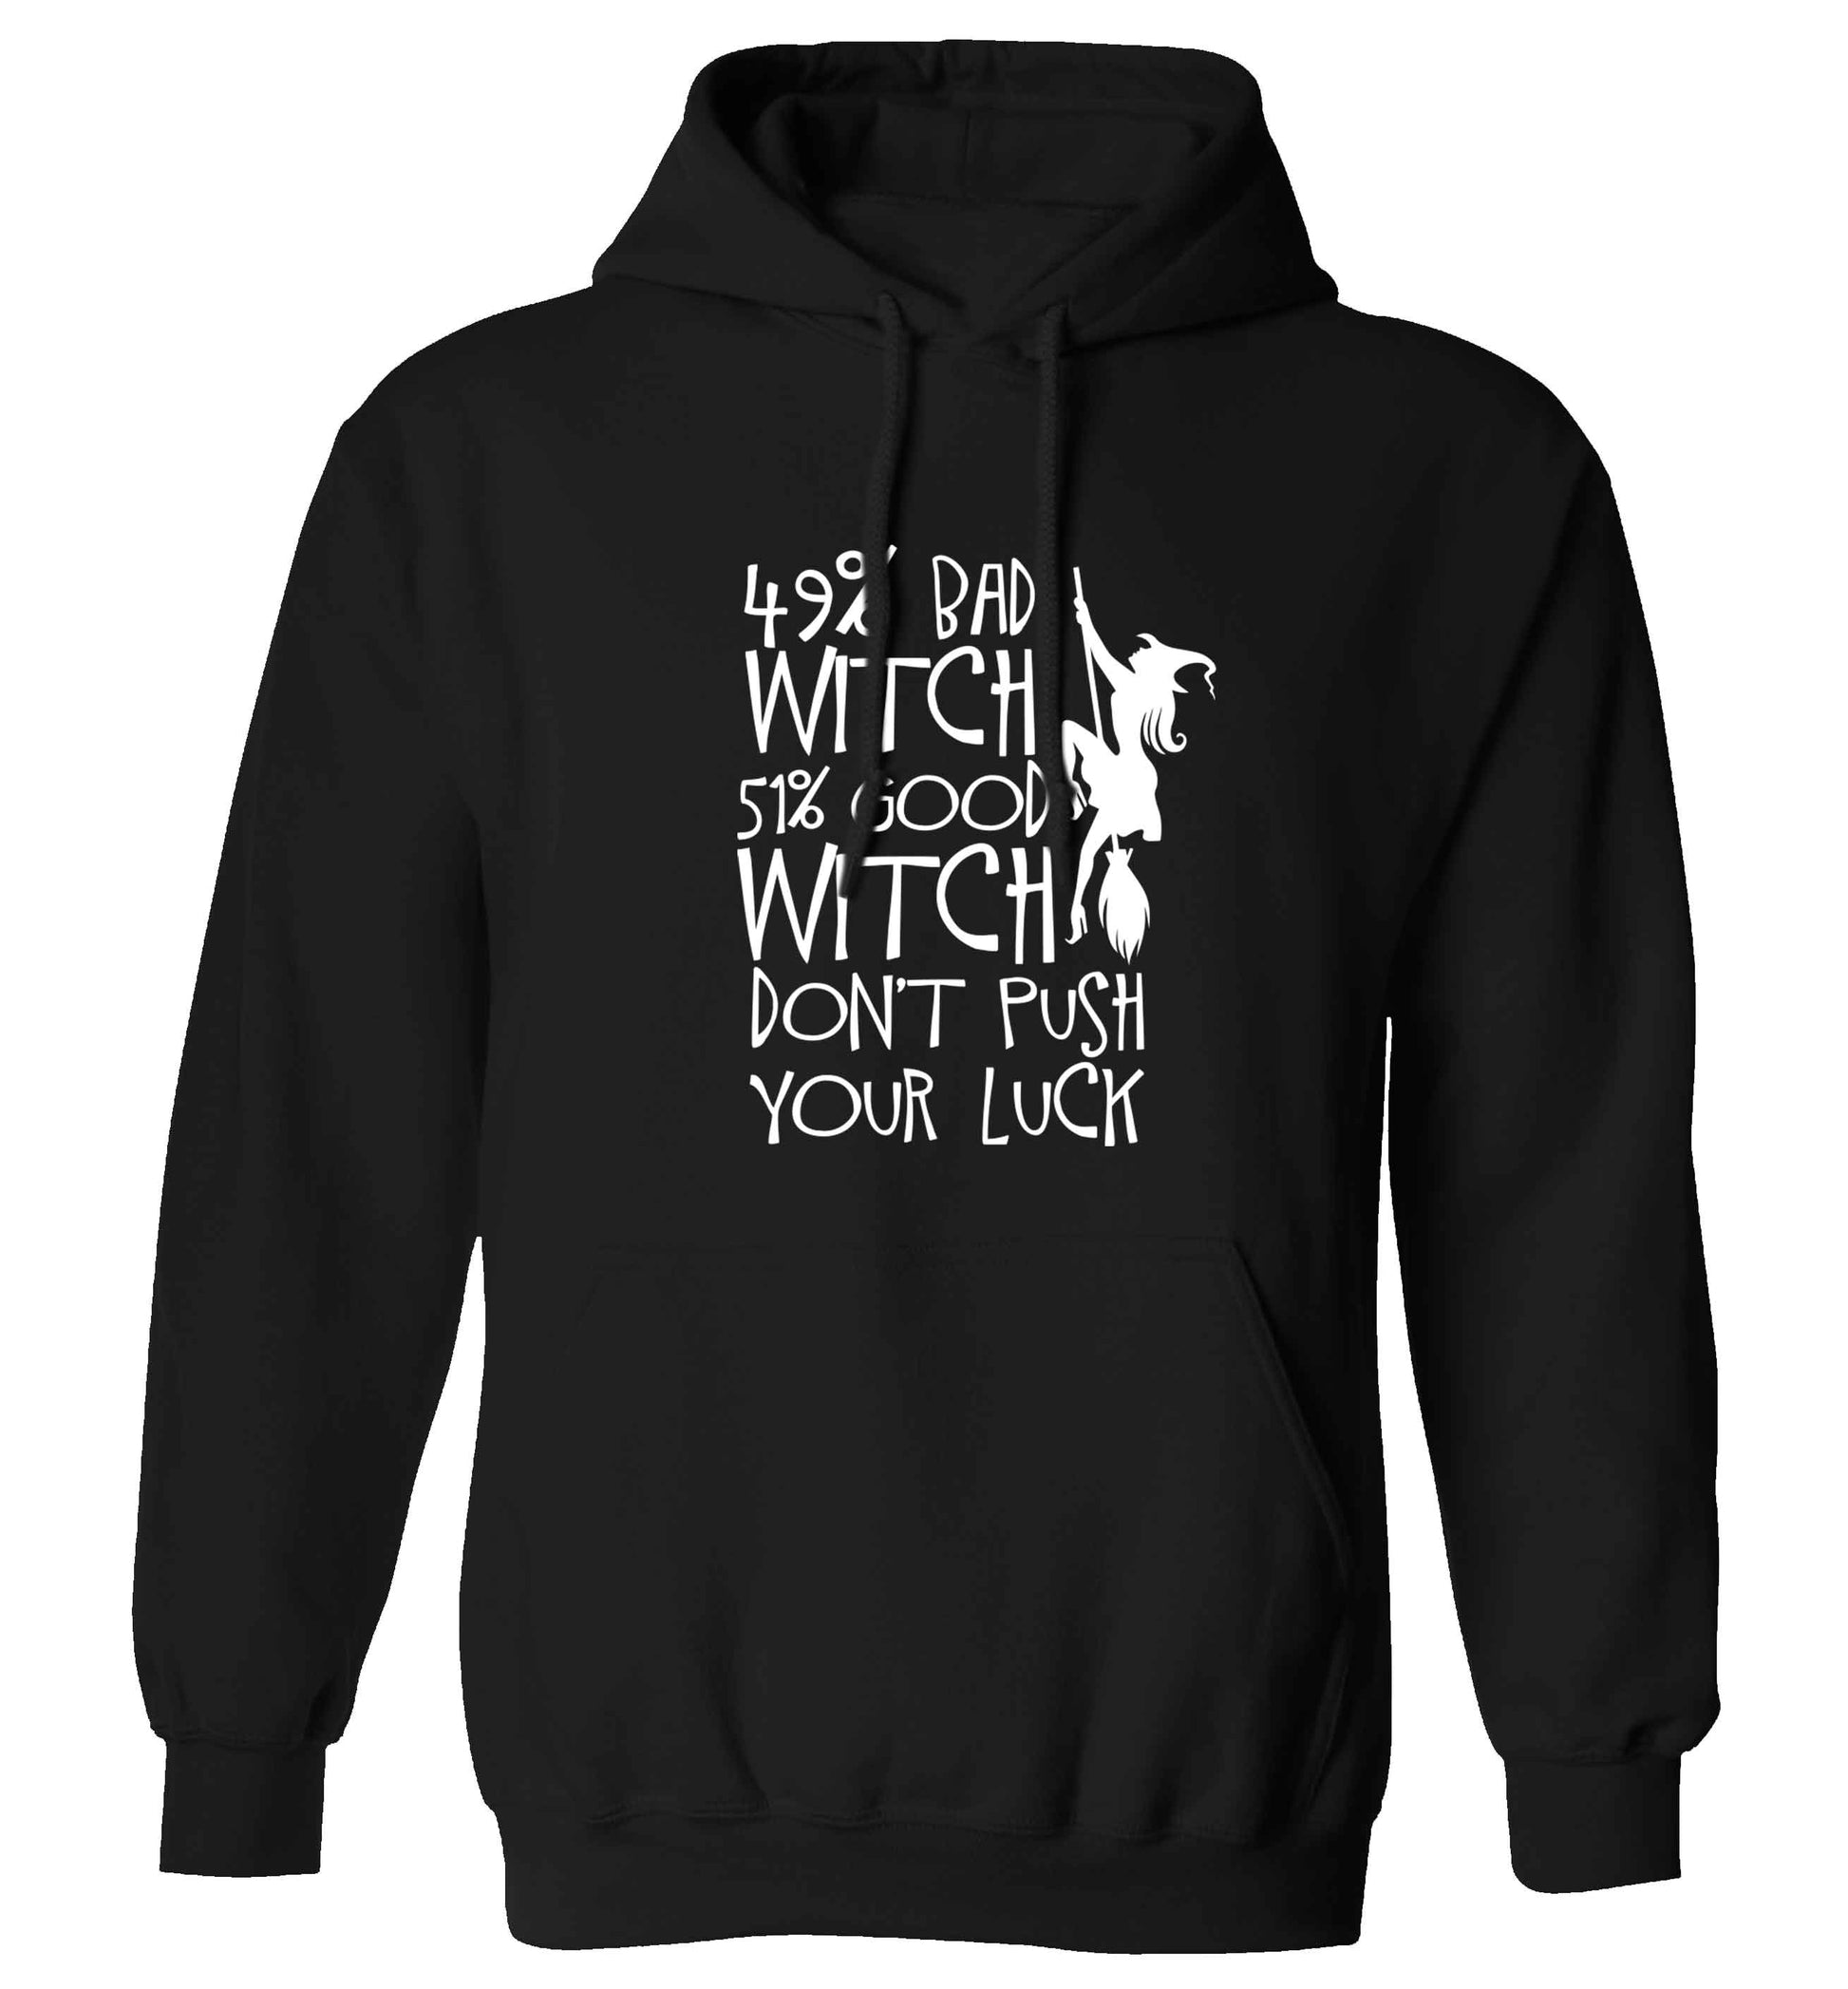 49% bad witch 51% good witch don't push your luck adults unisex black hoodie 2XL